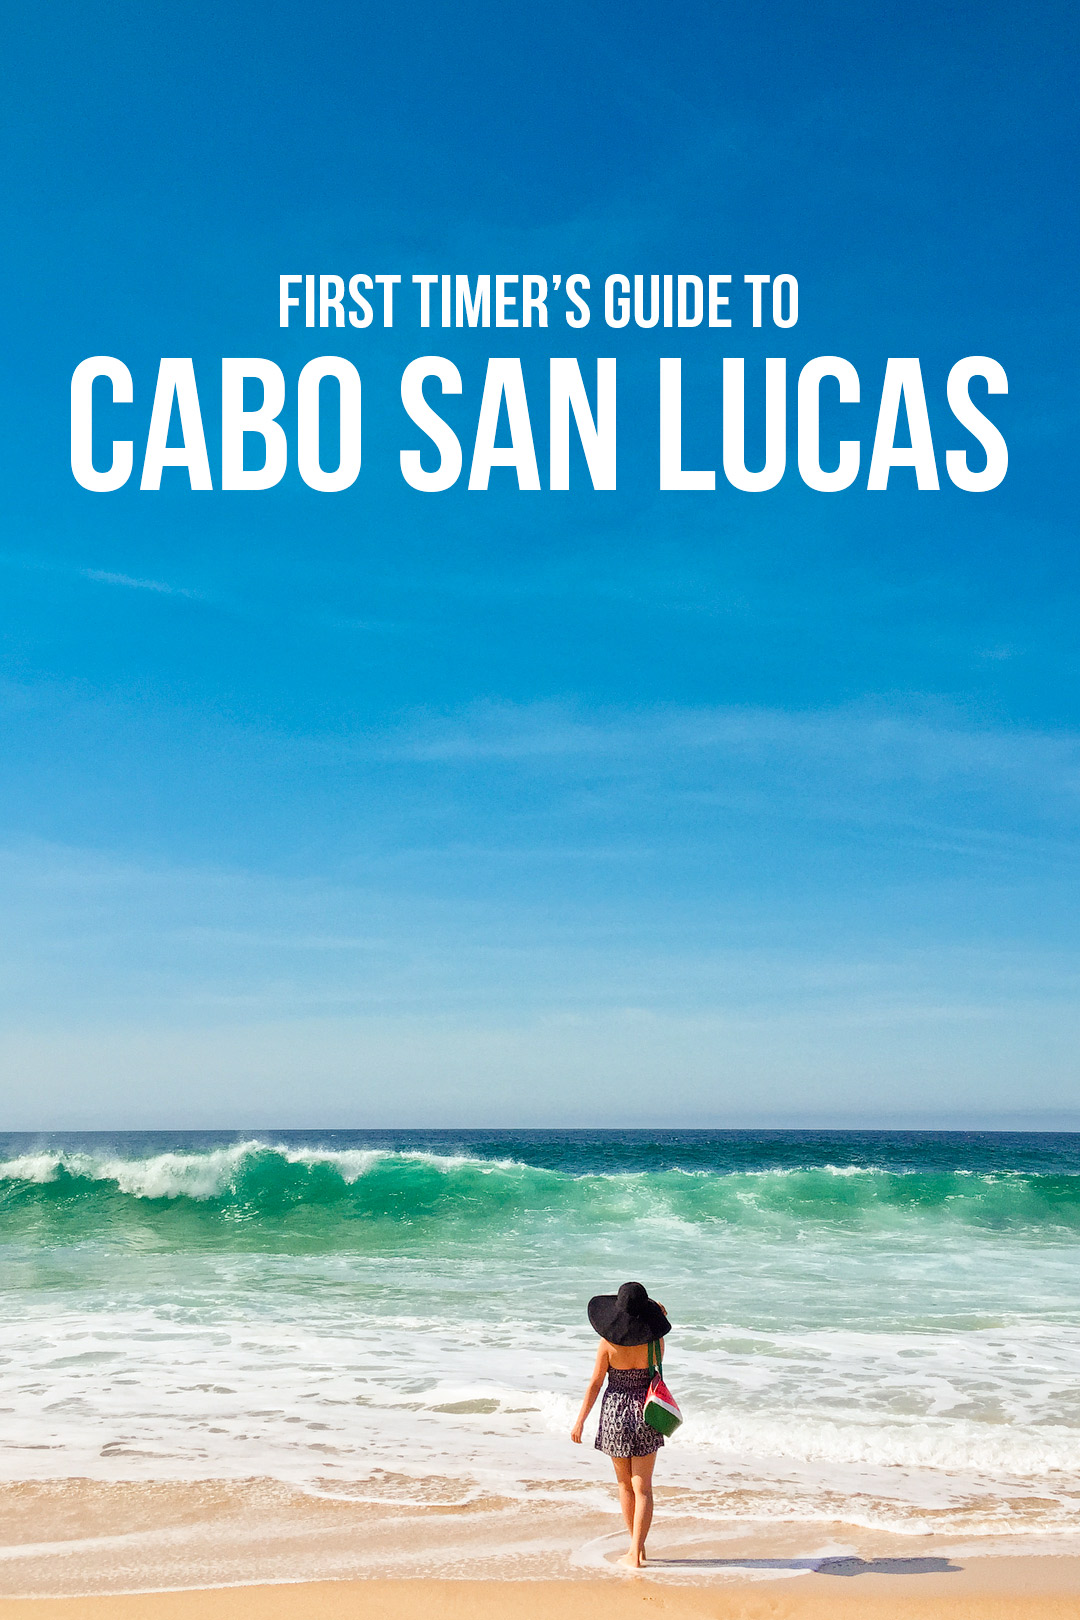 First Timer's guide to Cabo San Lucas Mexico